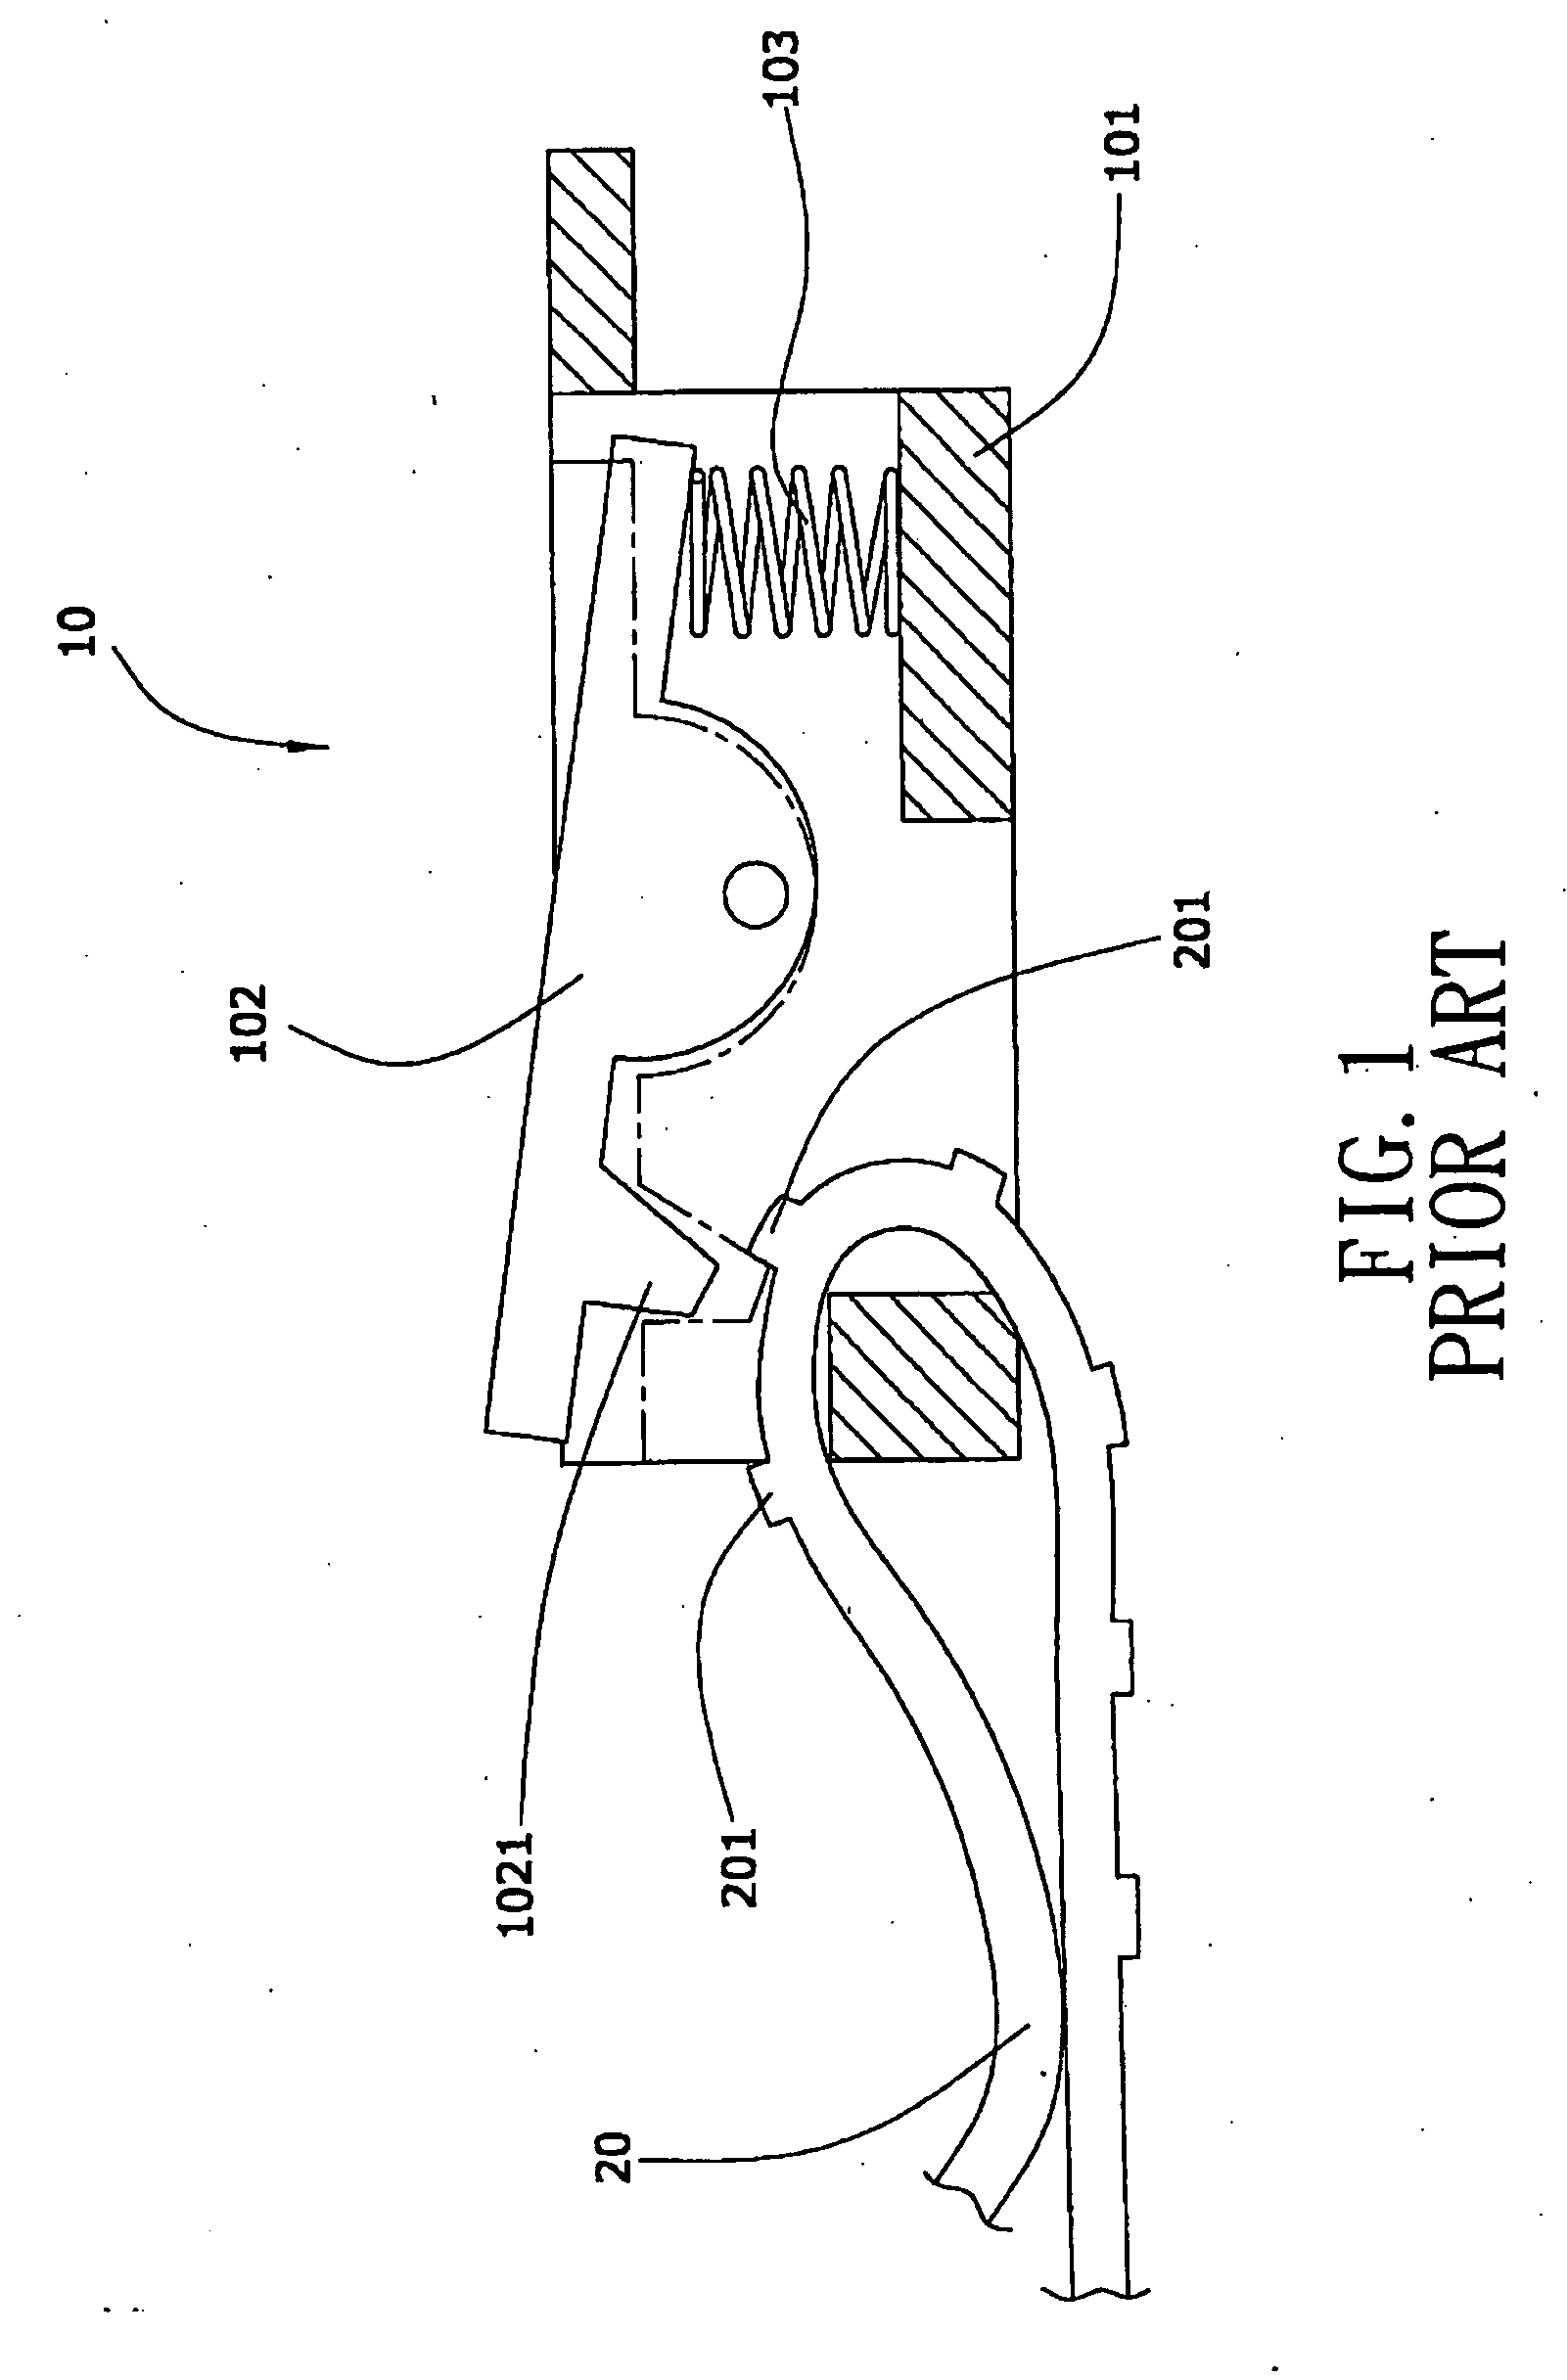 Adjusting Device for a Goggle Strap